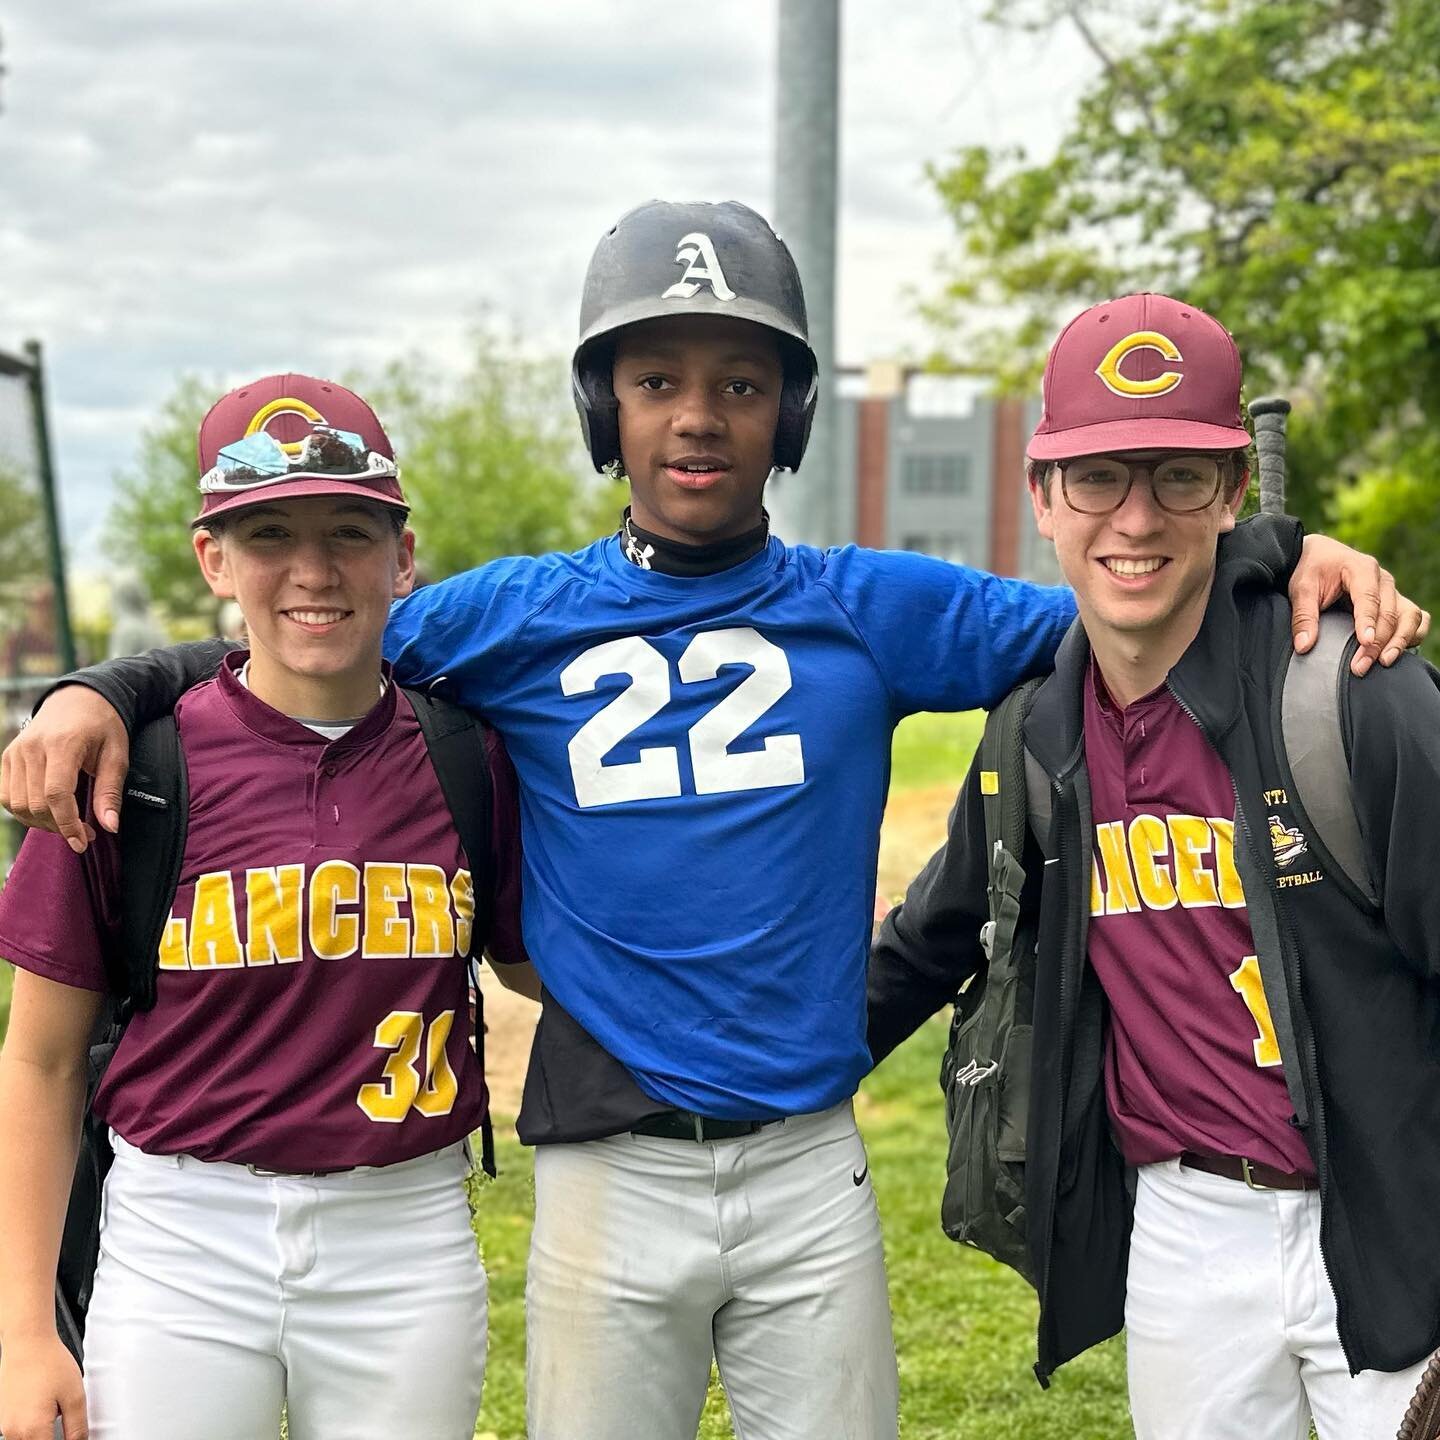 Big shout out to a lifelong Monarch Sofia Meer who made her varsity debut with Central High School today! Sofia pitched a shutout inning to close out a W for her squad. Sofia is pictured here after the game with fellow Monarchs Nirel Woodson and Luke